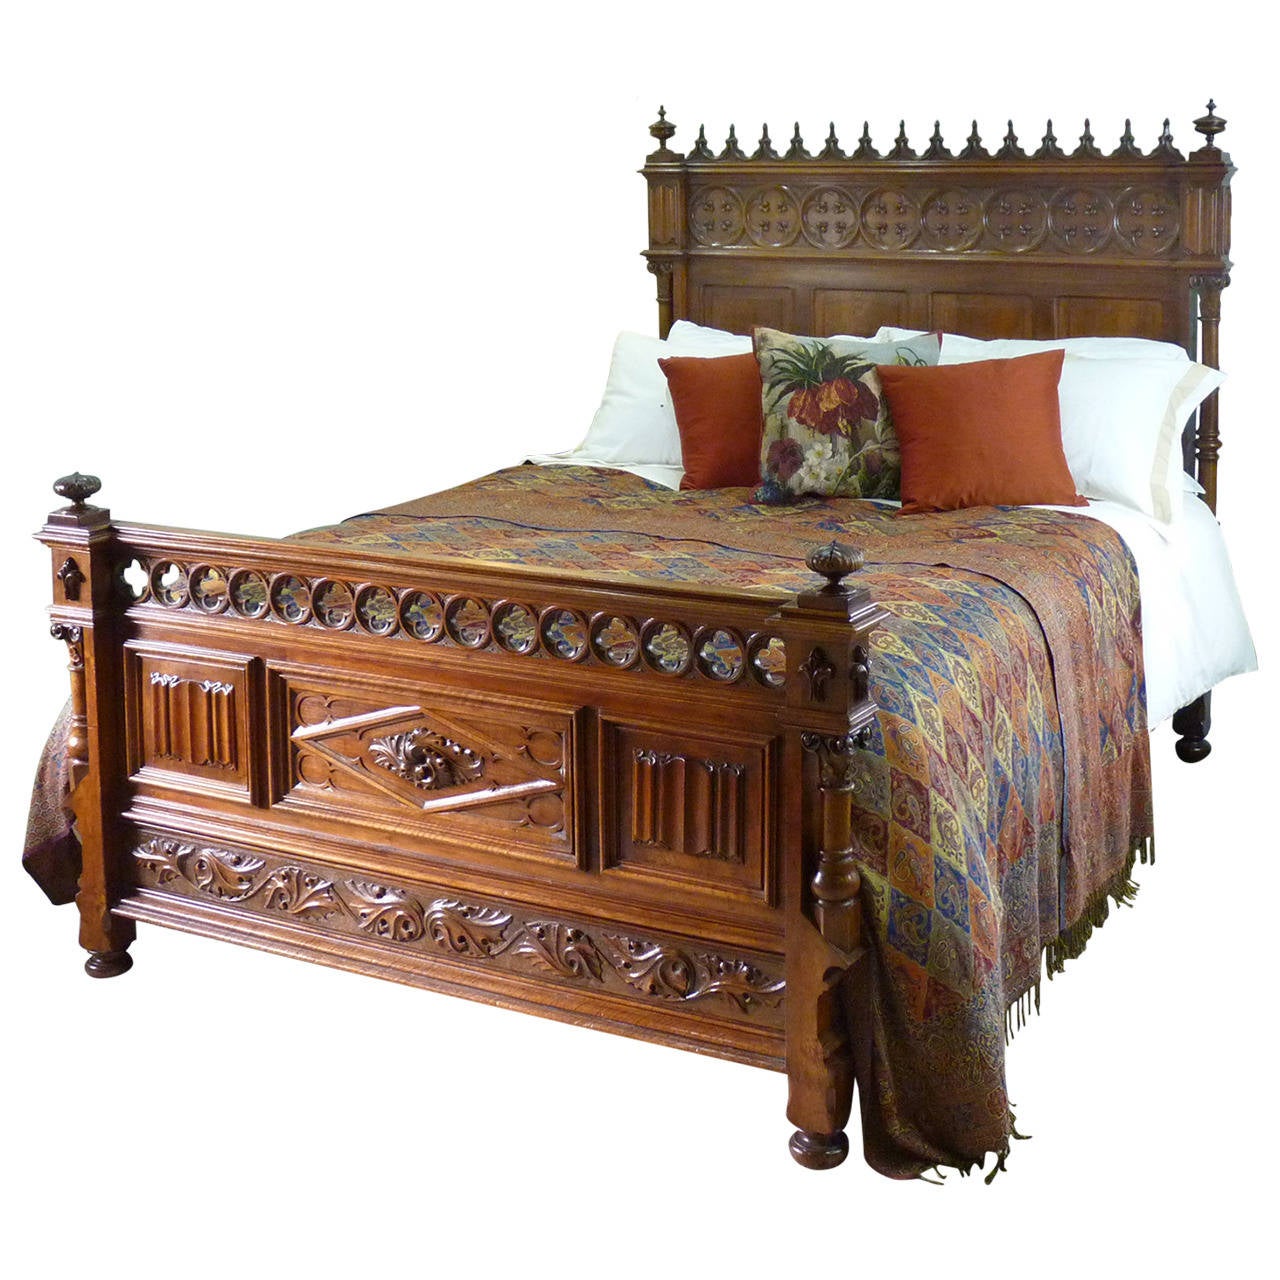 Rare Gothic Style Bed In Walnut At 1stdibs, Gothic King Bed Frame